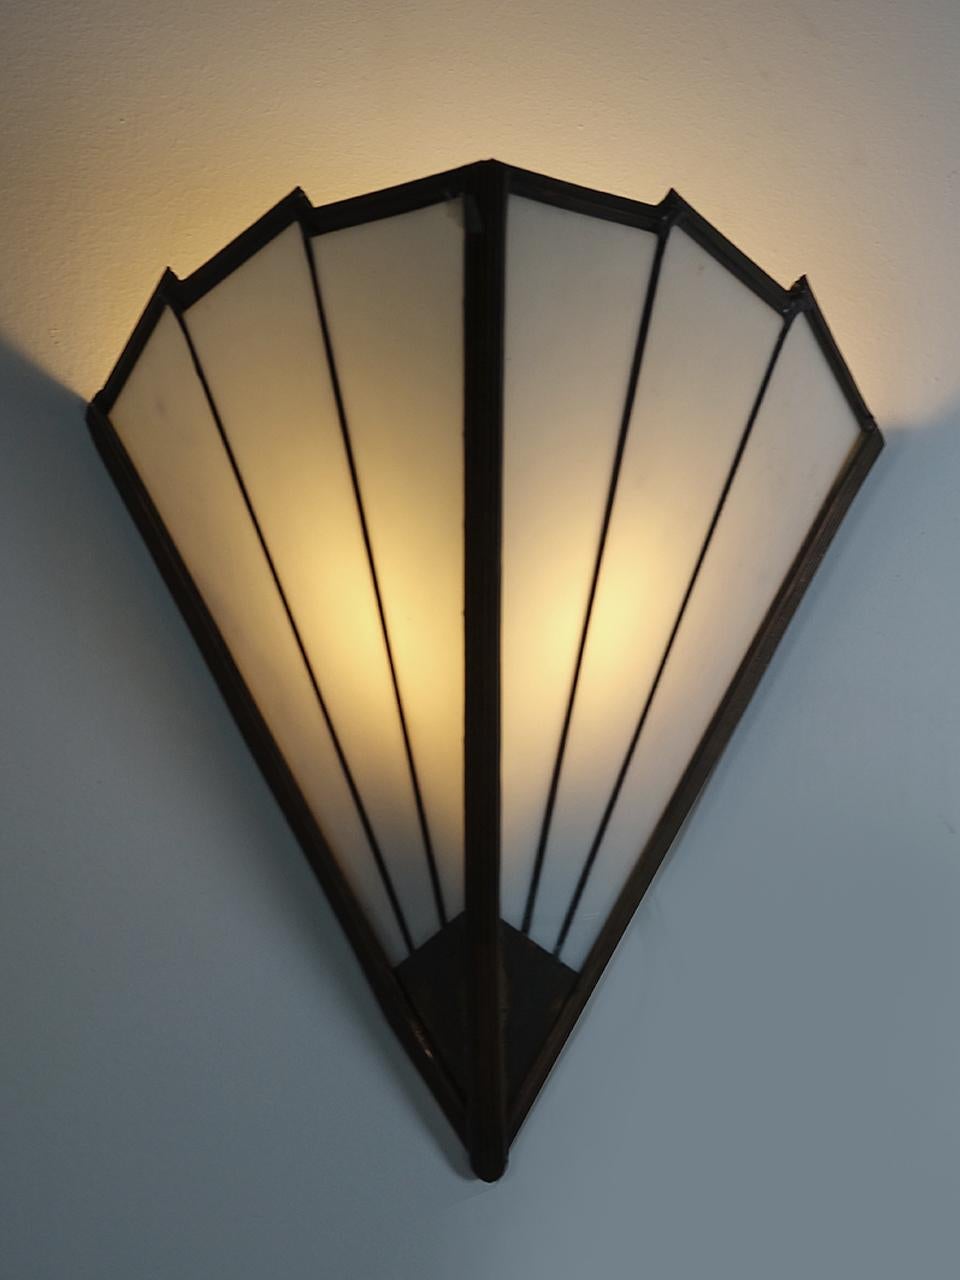 These very deco looking sconces are handmade using milk glass and brass. It's a 2 sided fan design... simple and tasteful.
We have a few of these 6 panel sconces in stock. They are prices per lamp so you can buy one or the collection.